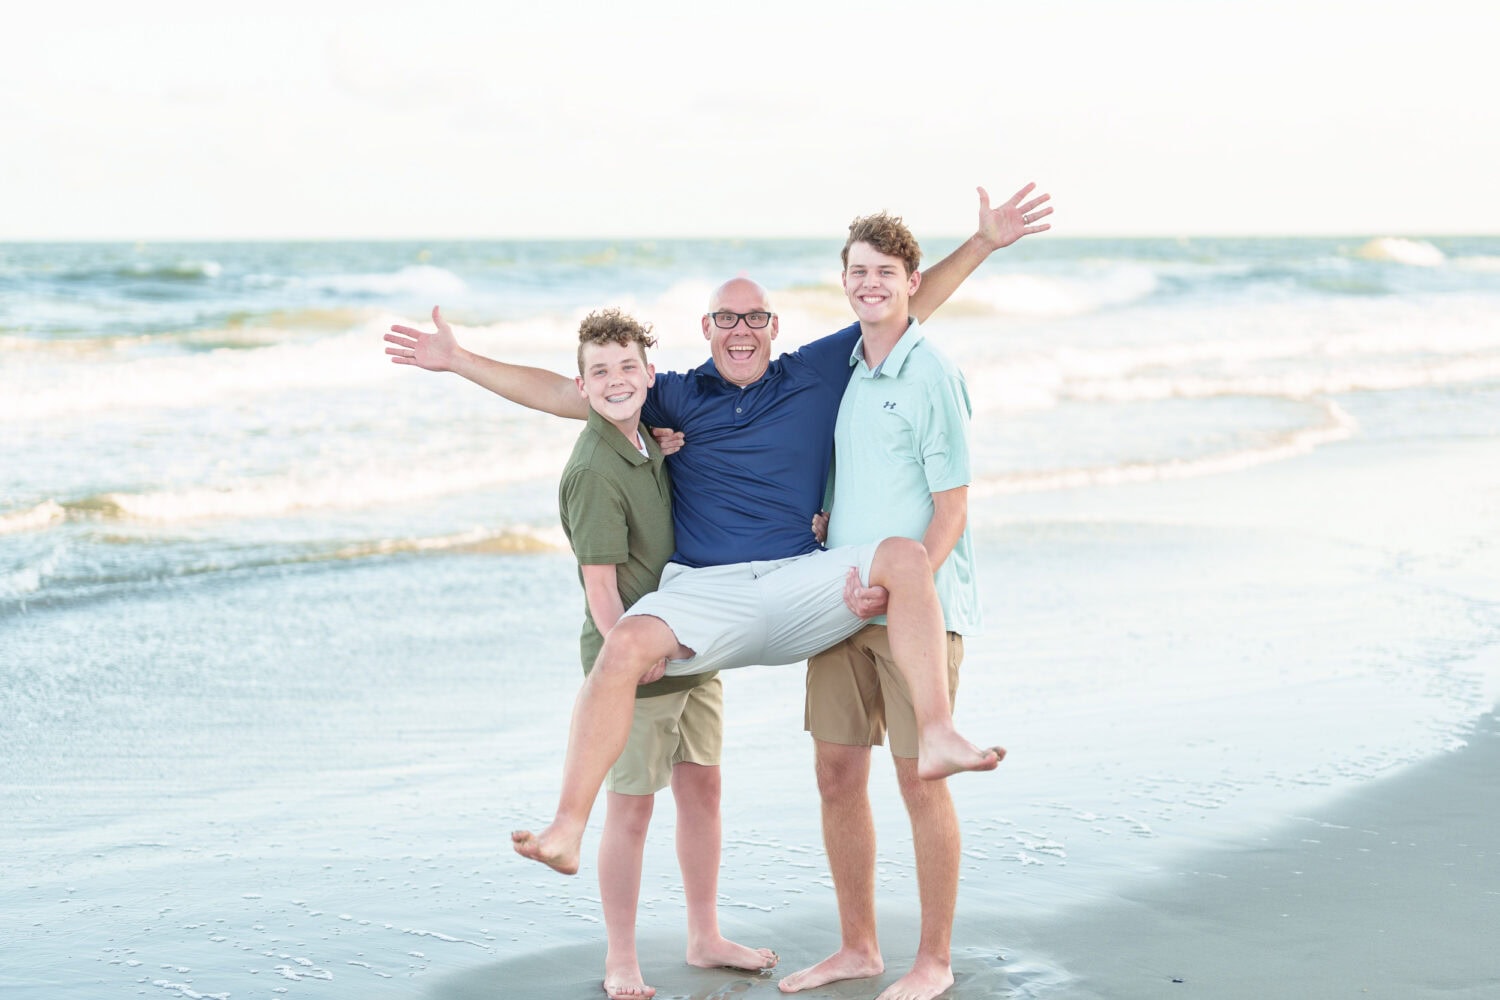 Sons lifting dad into the air - North Myrtle Beach